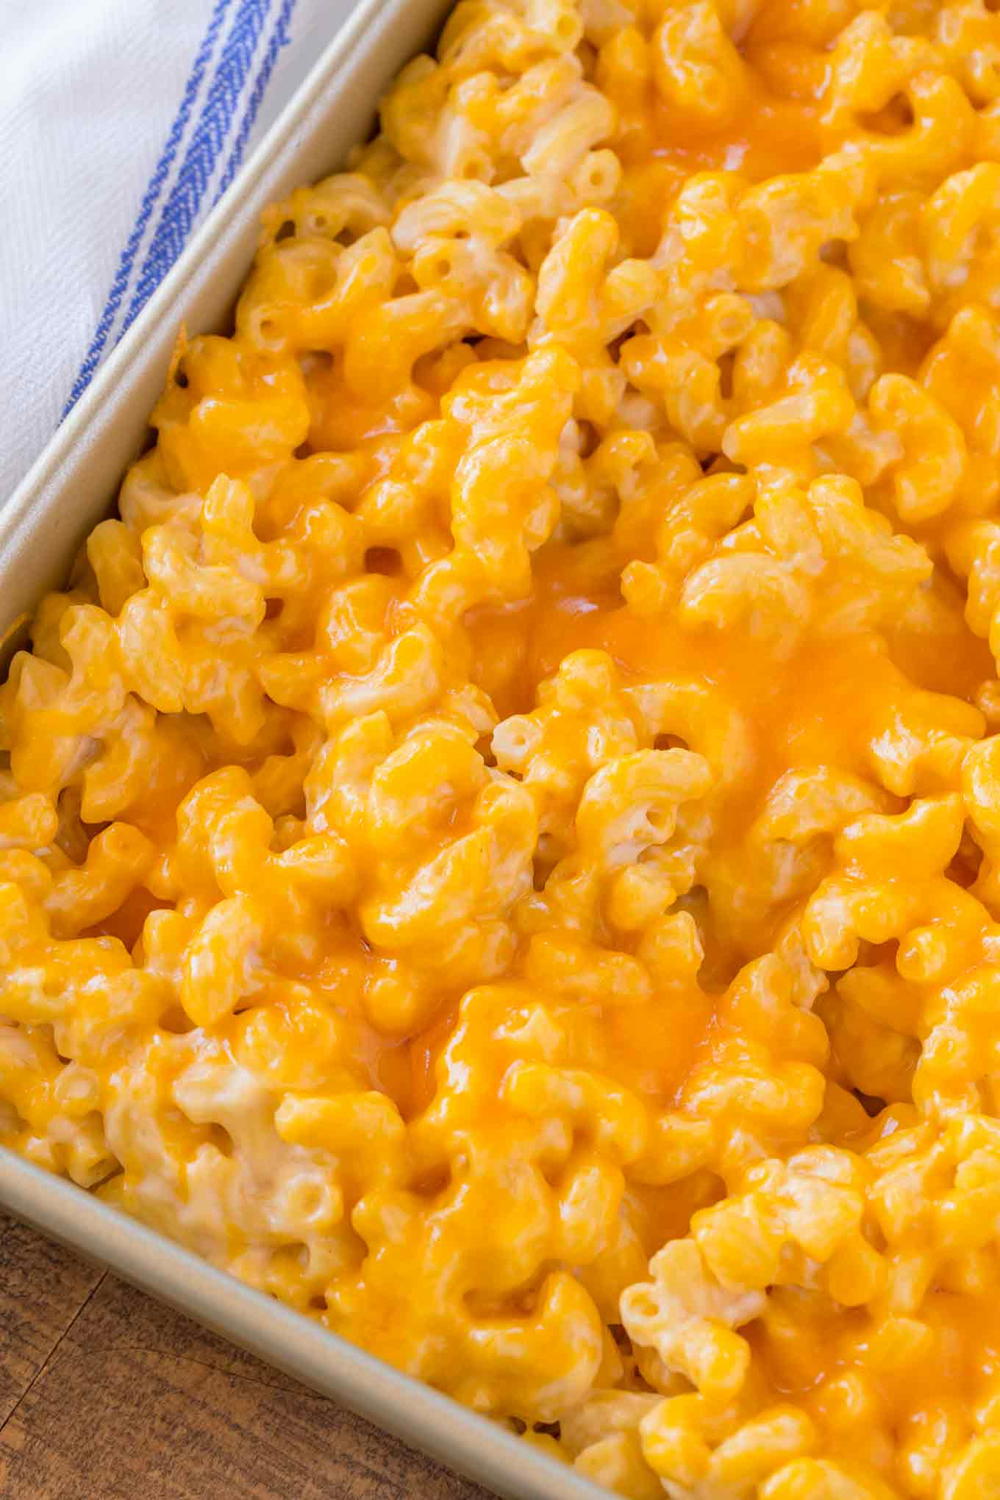 best easy macaroni and cheese recipe ever